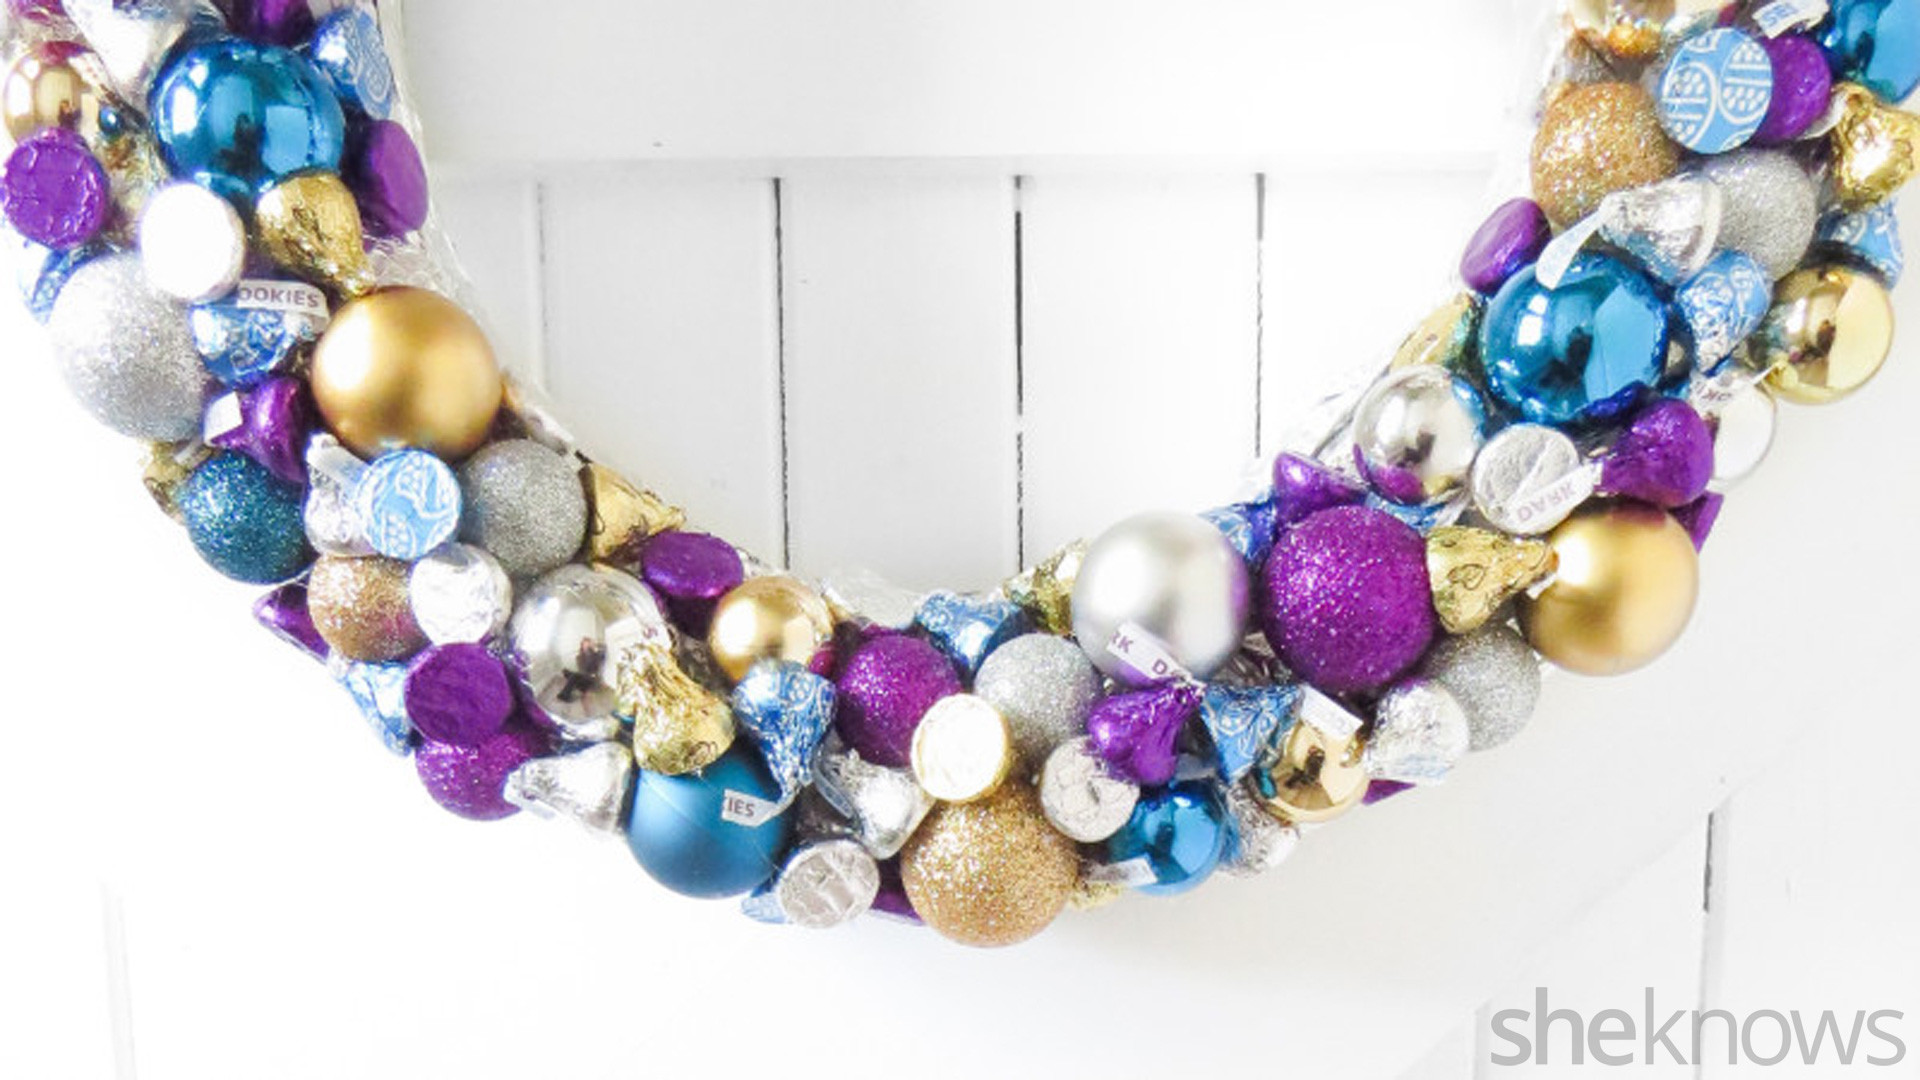 1920x1080 How to make your own adorable “Kiss”-mas wreath